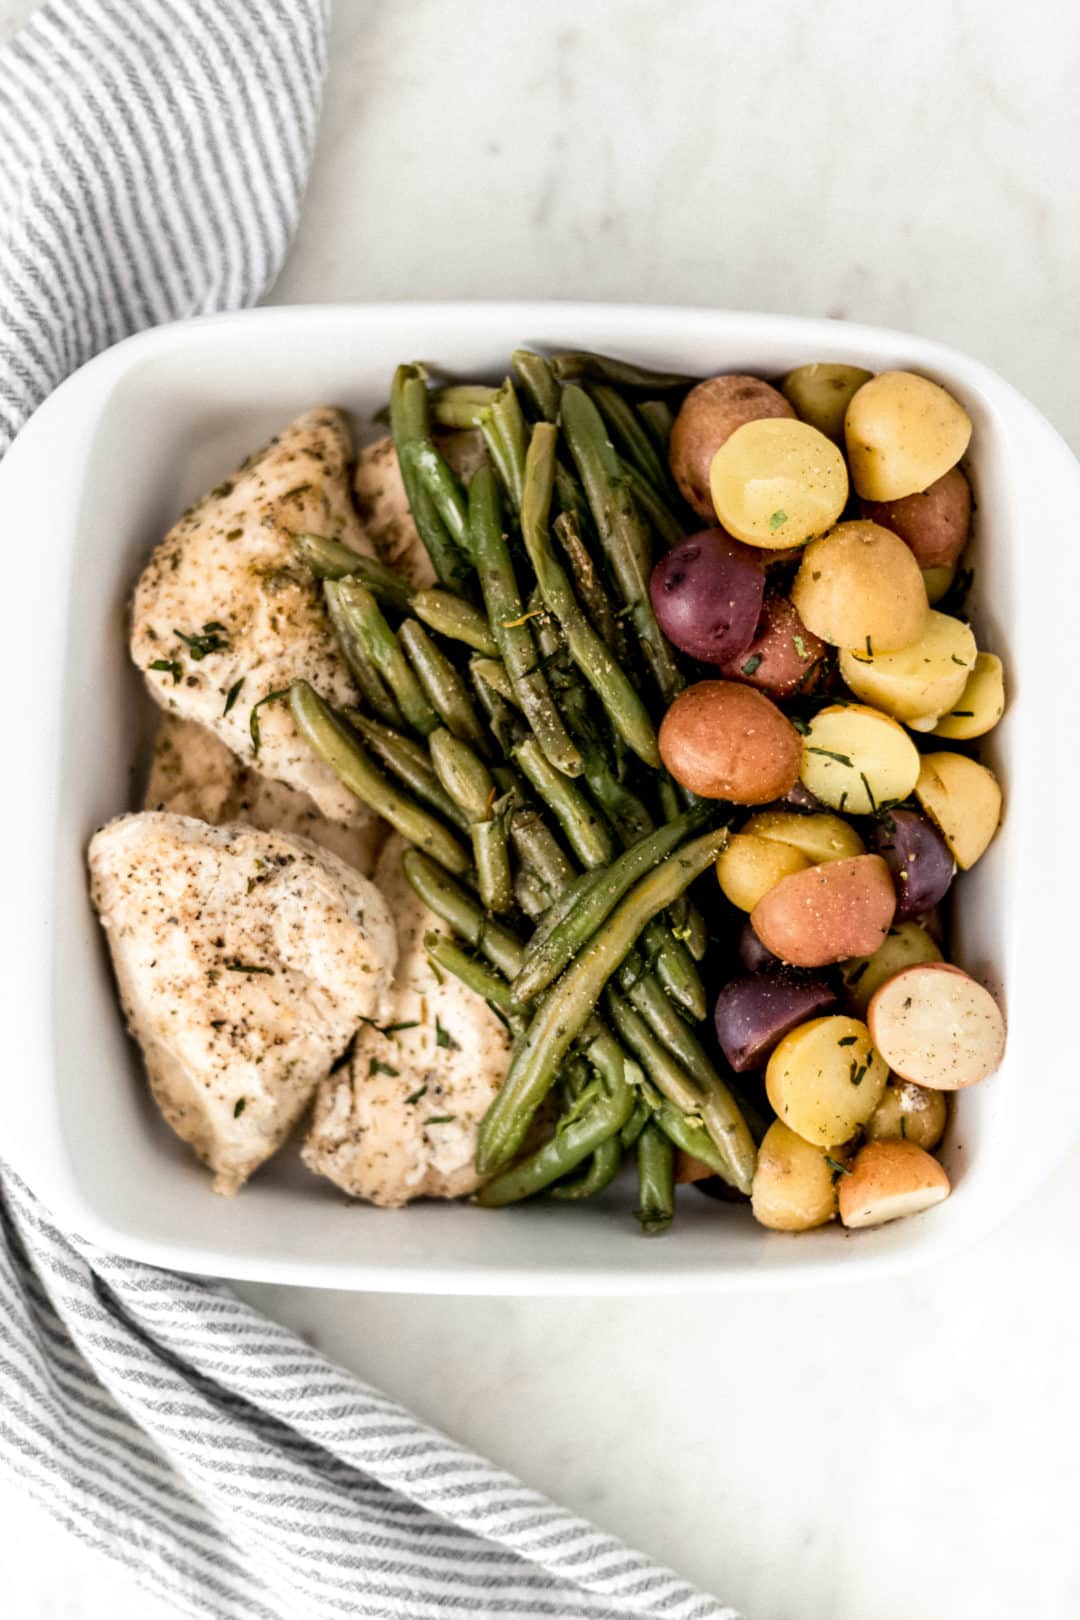 Instant Pot Chicken And Potatoes With Green Beans,When Is Strawberry Season Over